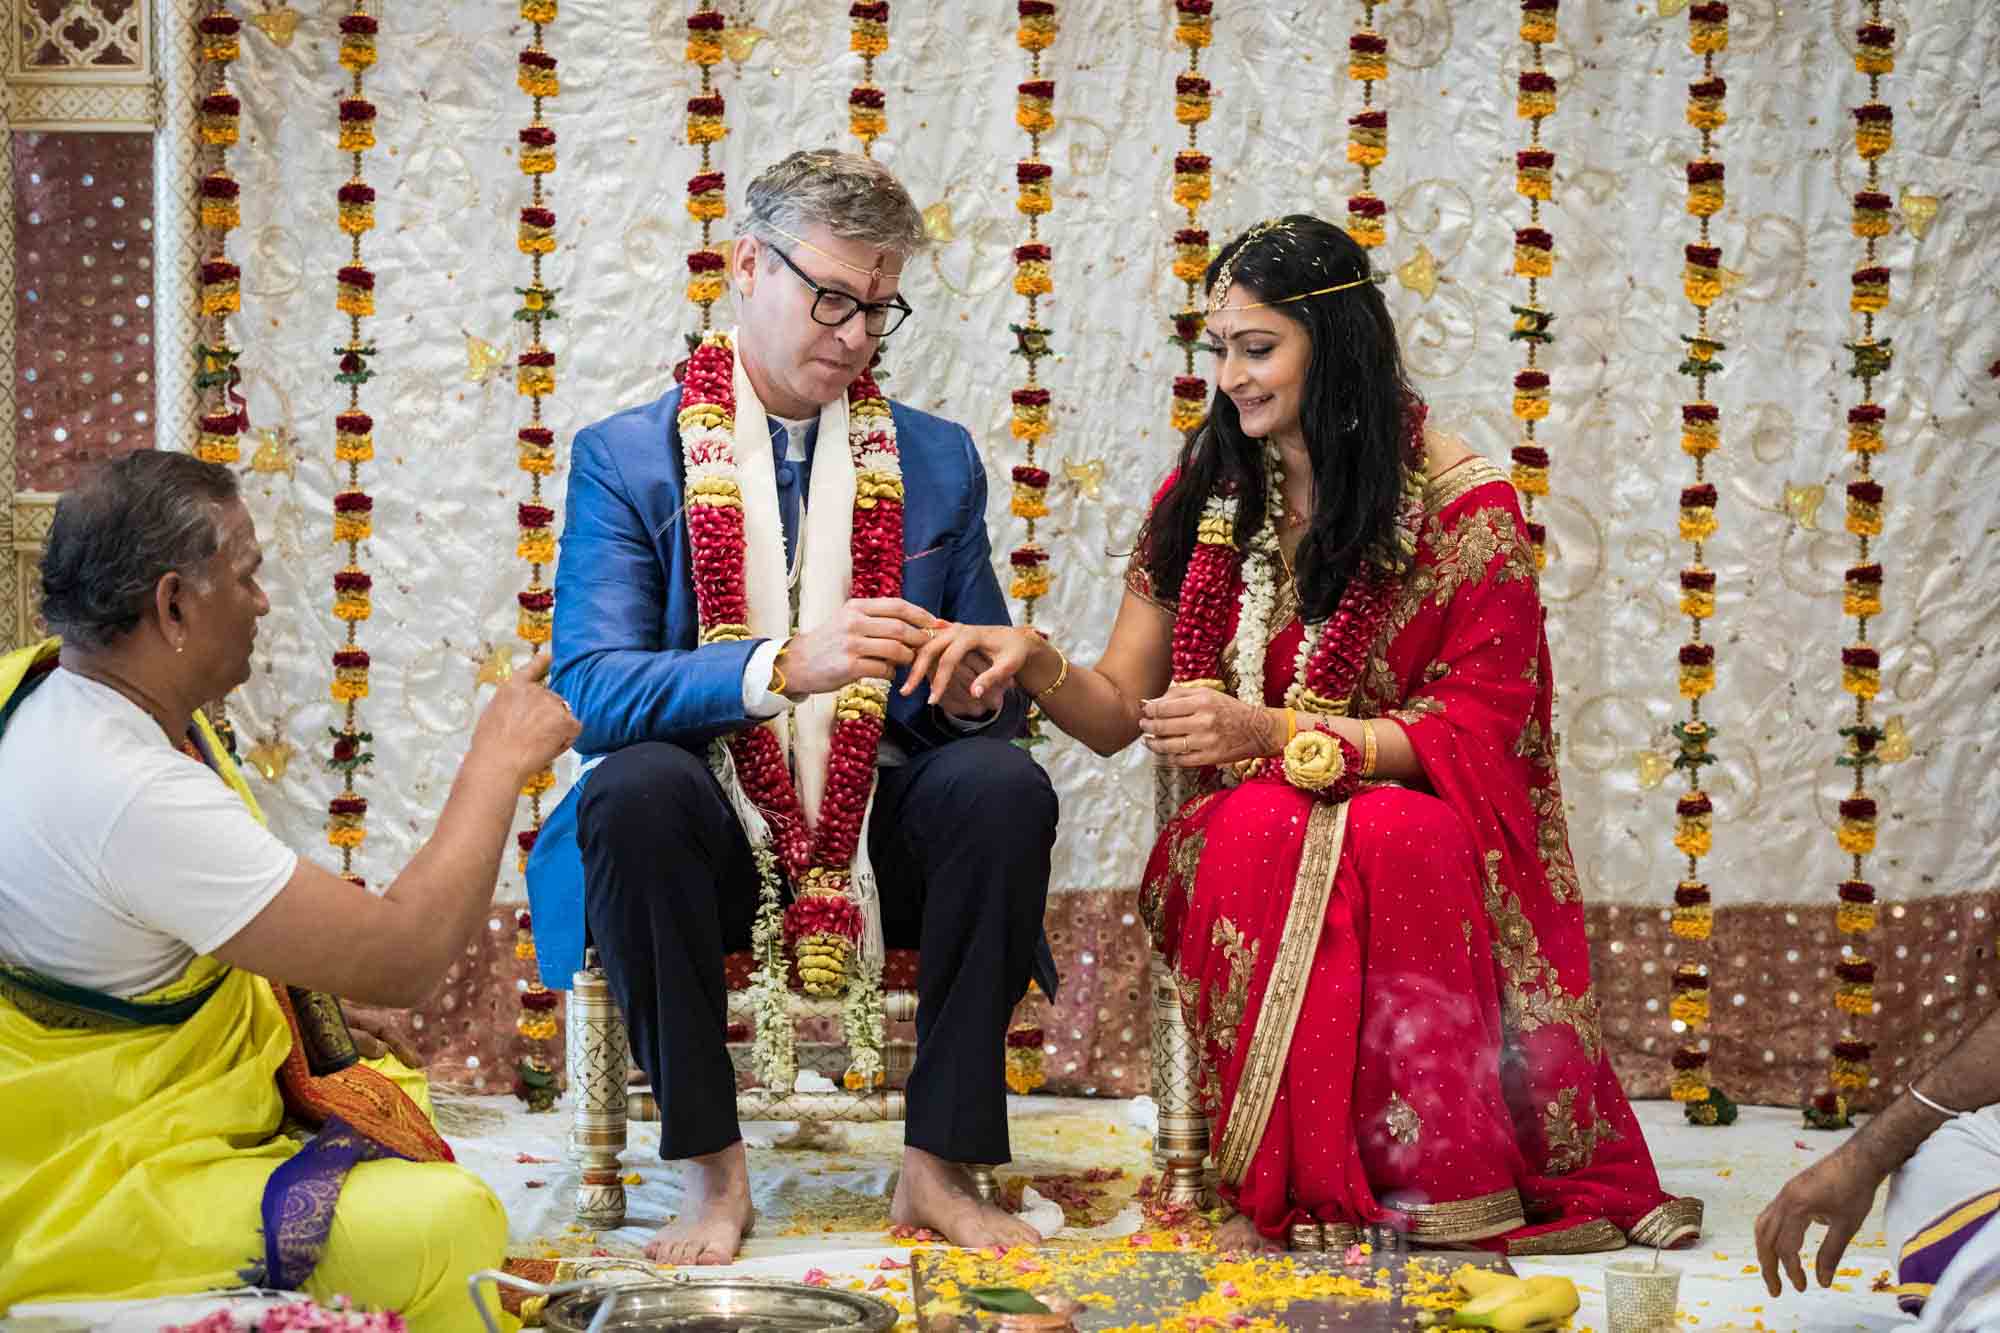 Groom putting ring on bride's hand at a Ganesha Temple wedding